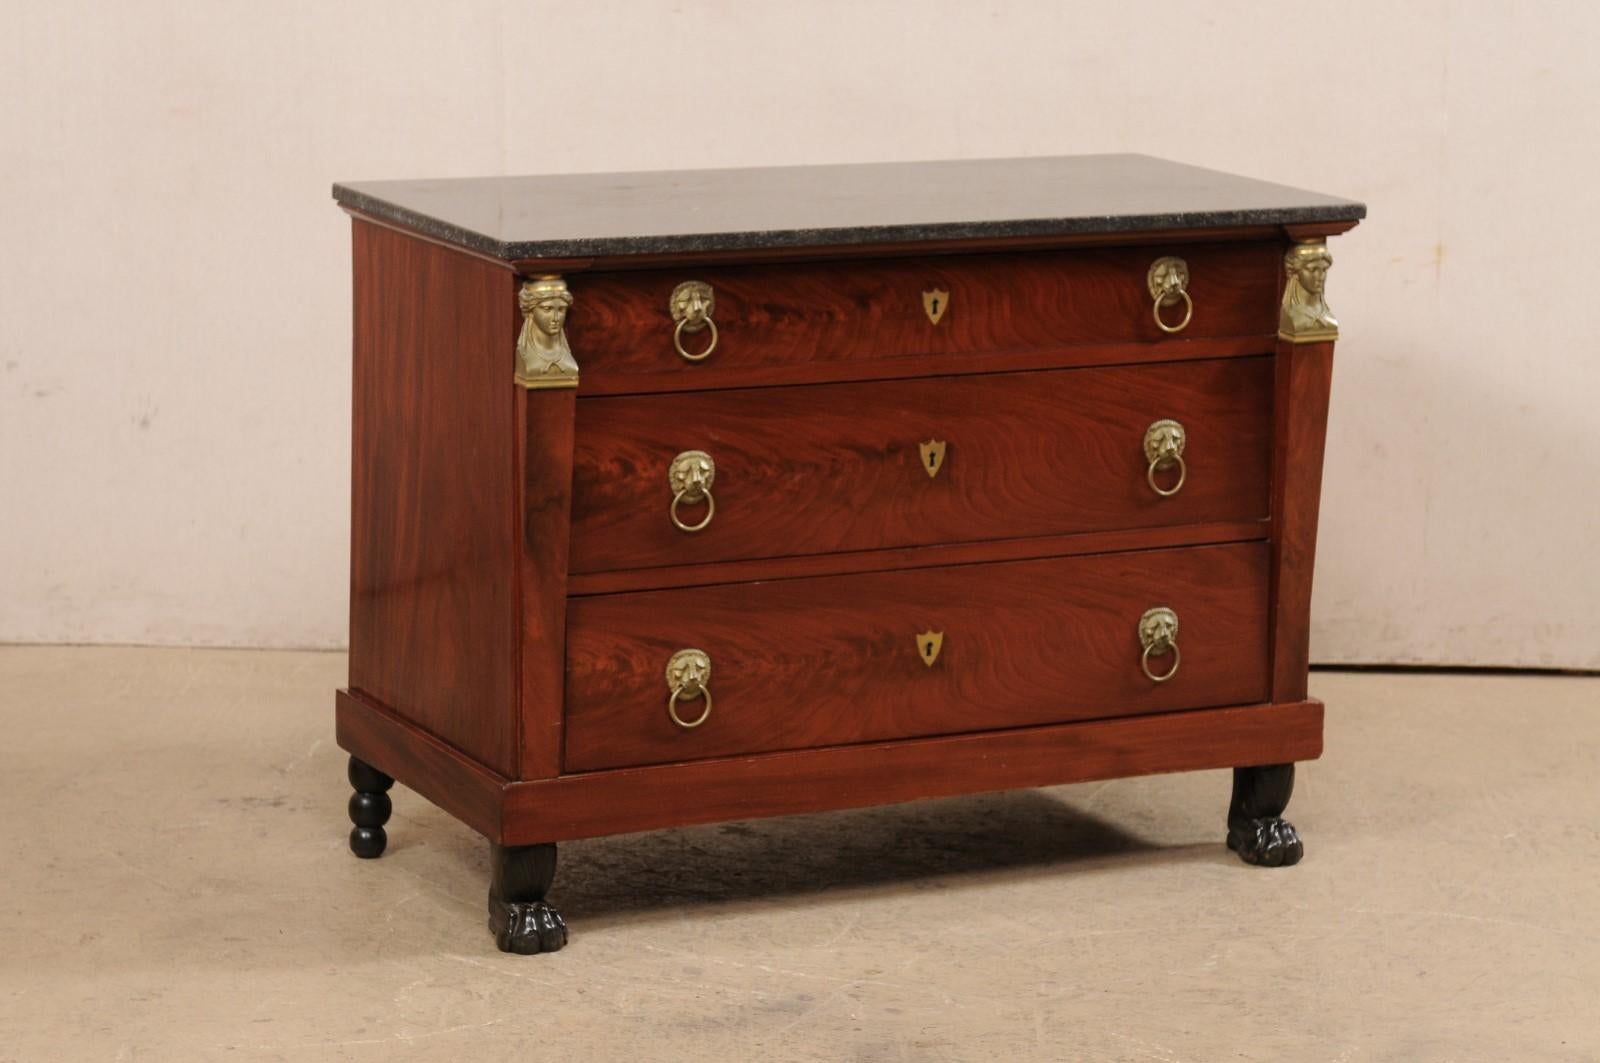 A French Empire period wooden commode, with marble top and revival accents, from the early 19th century. This antique commode from France features a rectangular-shaped black marble top, above a case which houses three drawers and is designed with